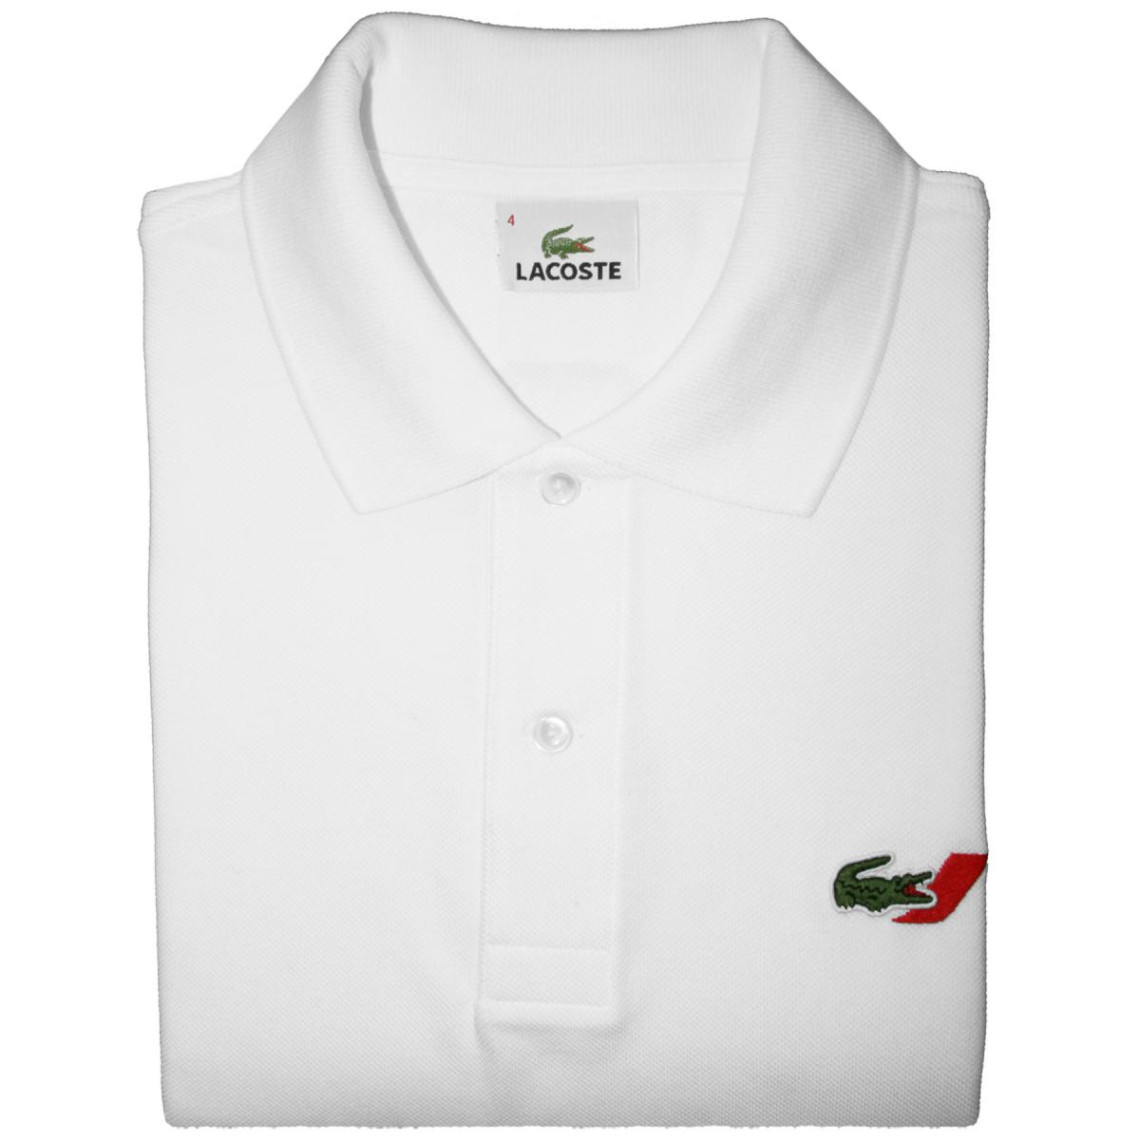 napkin mimic Foresight POLO HOMME LACOSTE AIR FRANCE | 3 SUISSES